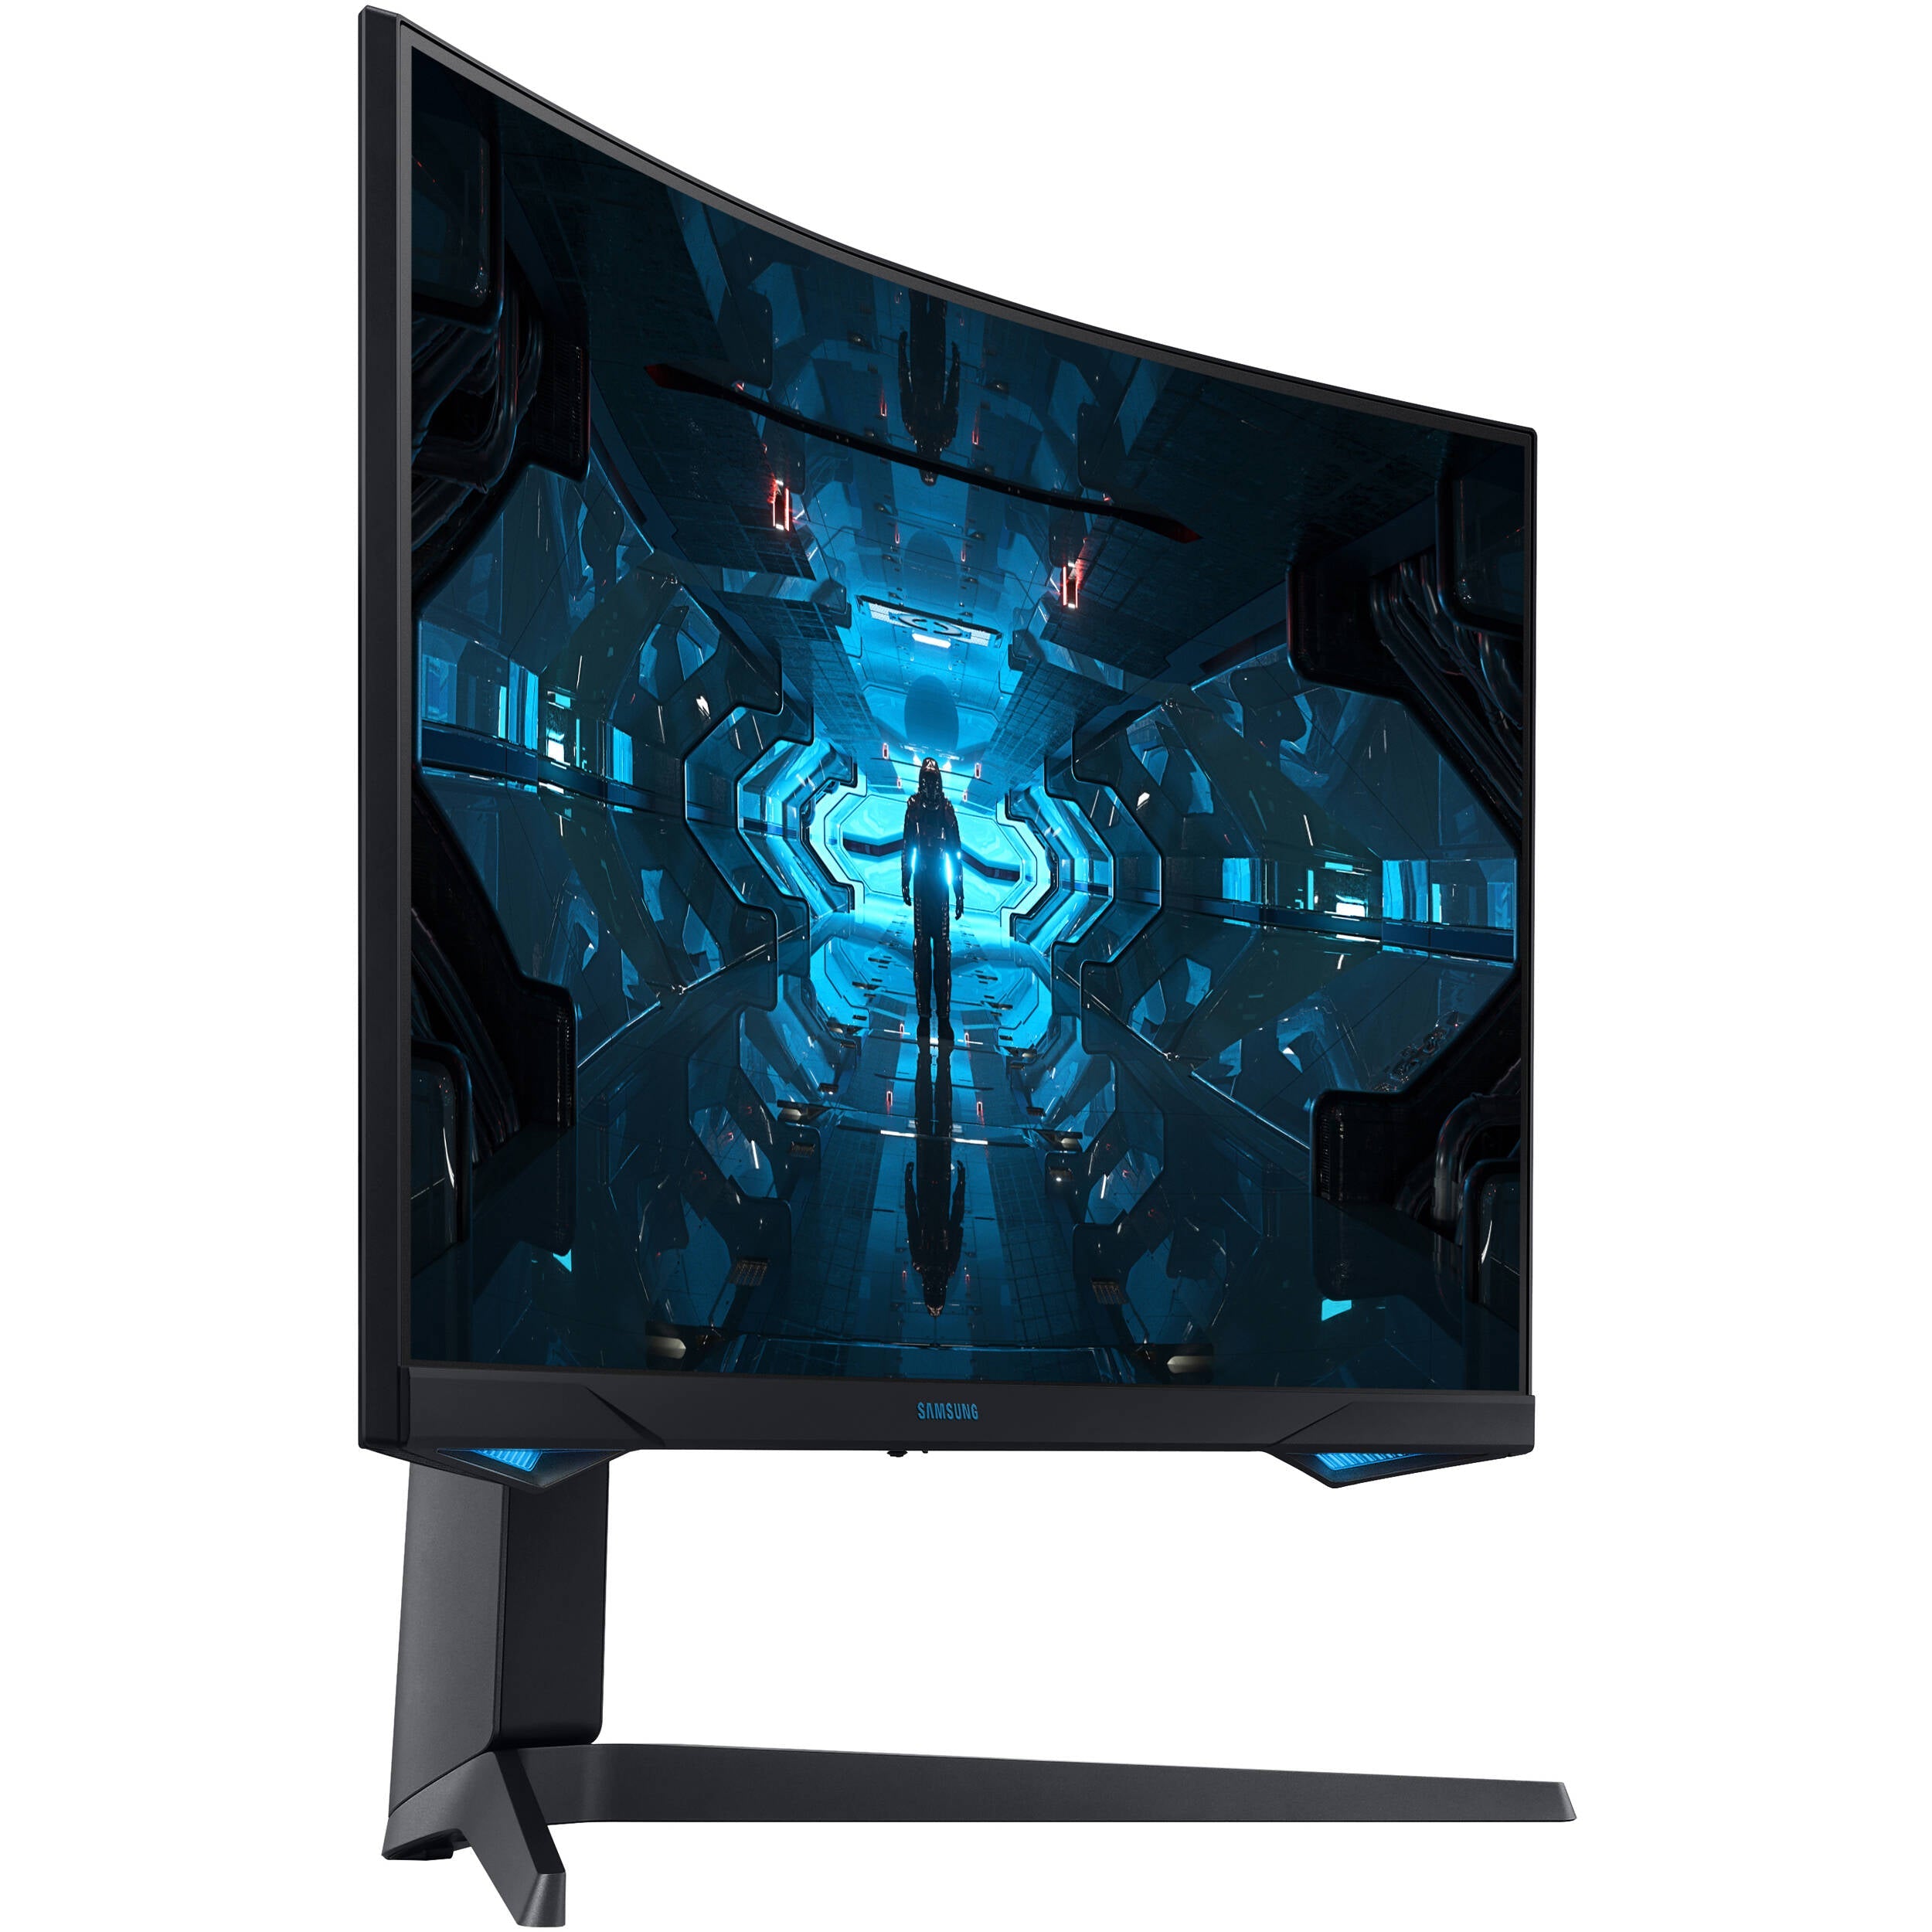 Samsung LC32G73TQSNXZA-RB 32" WQHD 2560 x 1440 240Hz Curved Gaming Monitor - Certified Refurbished